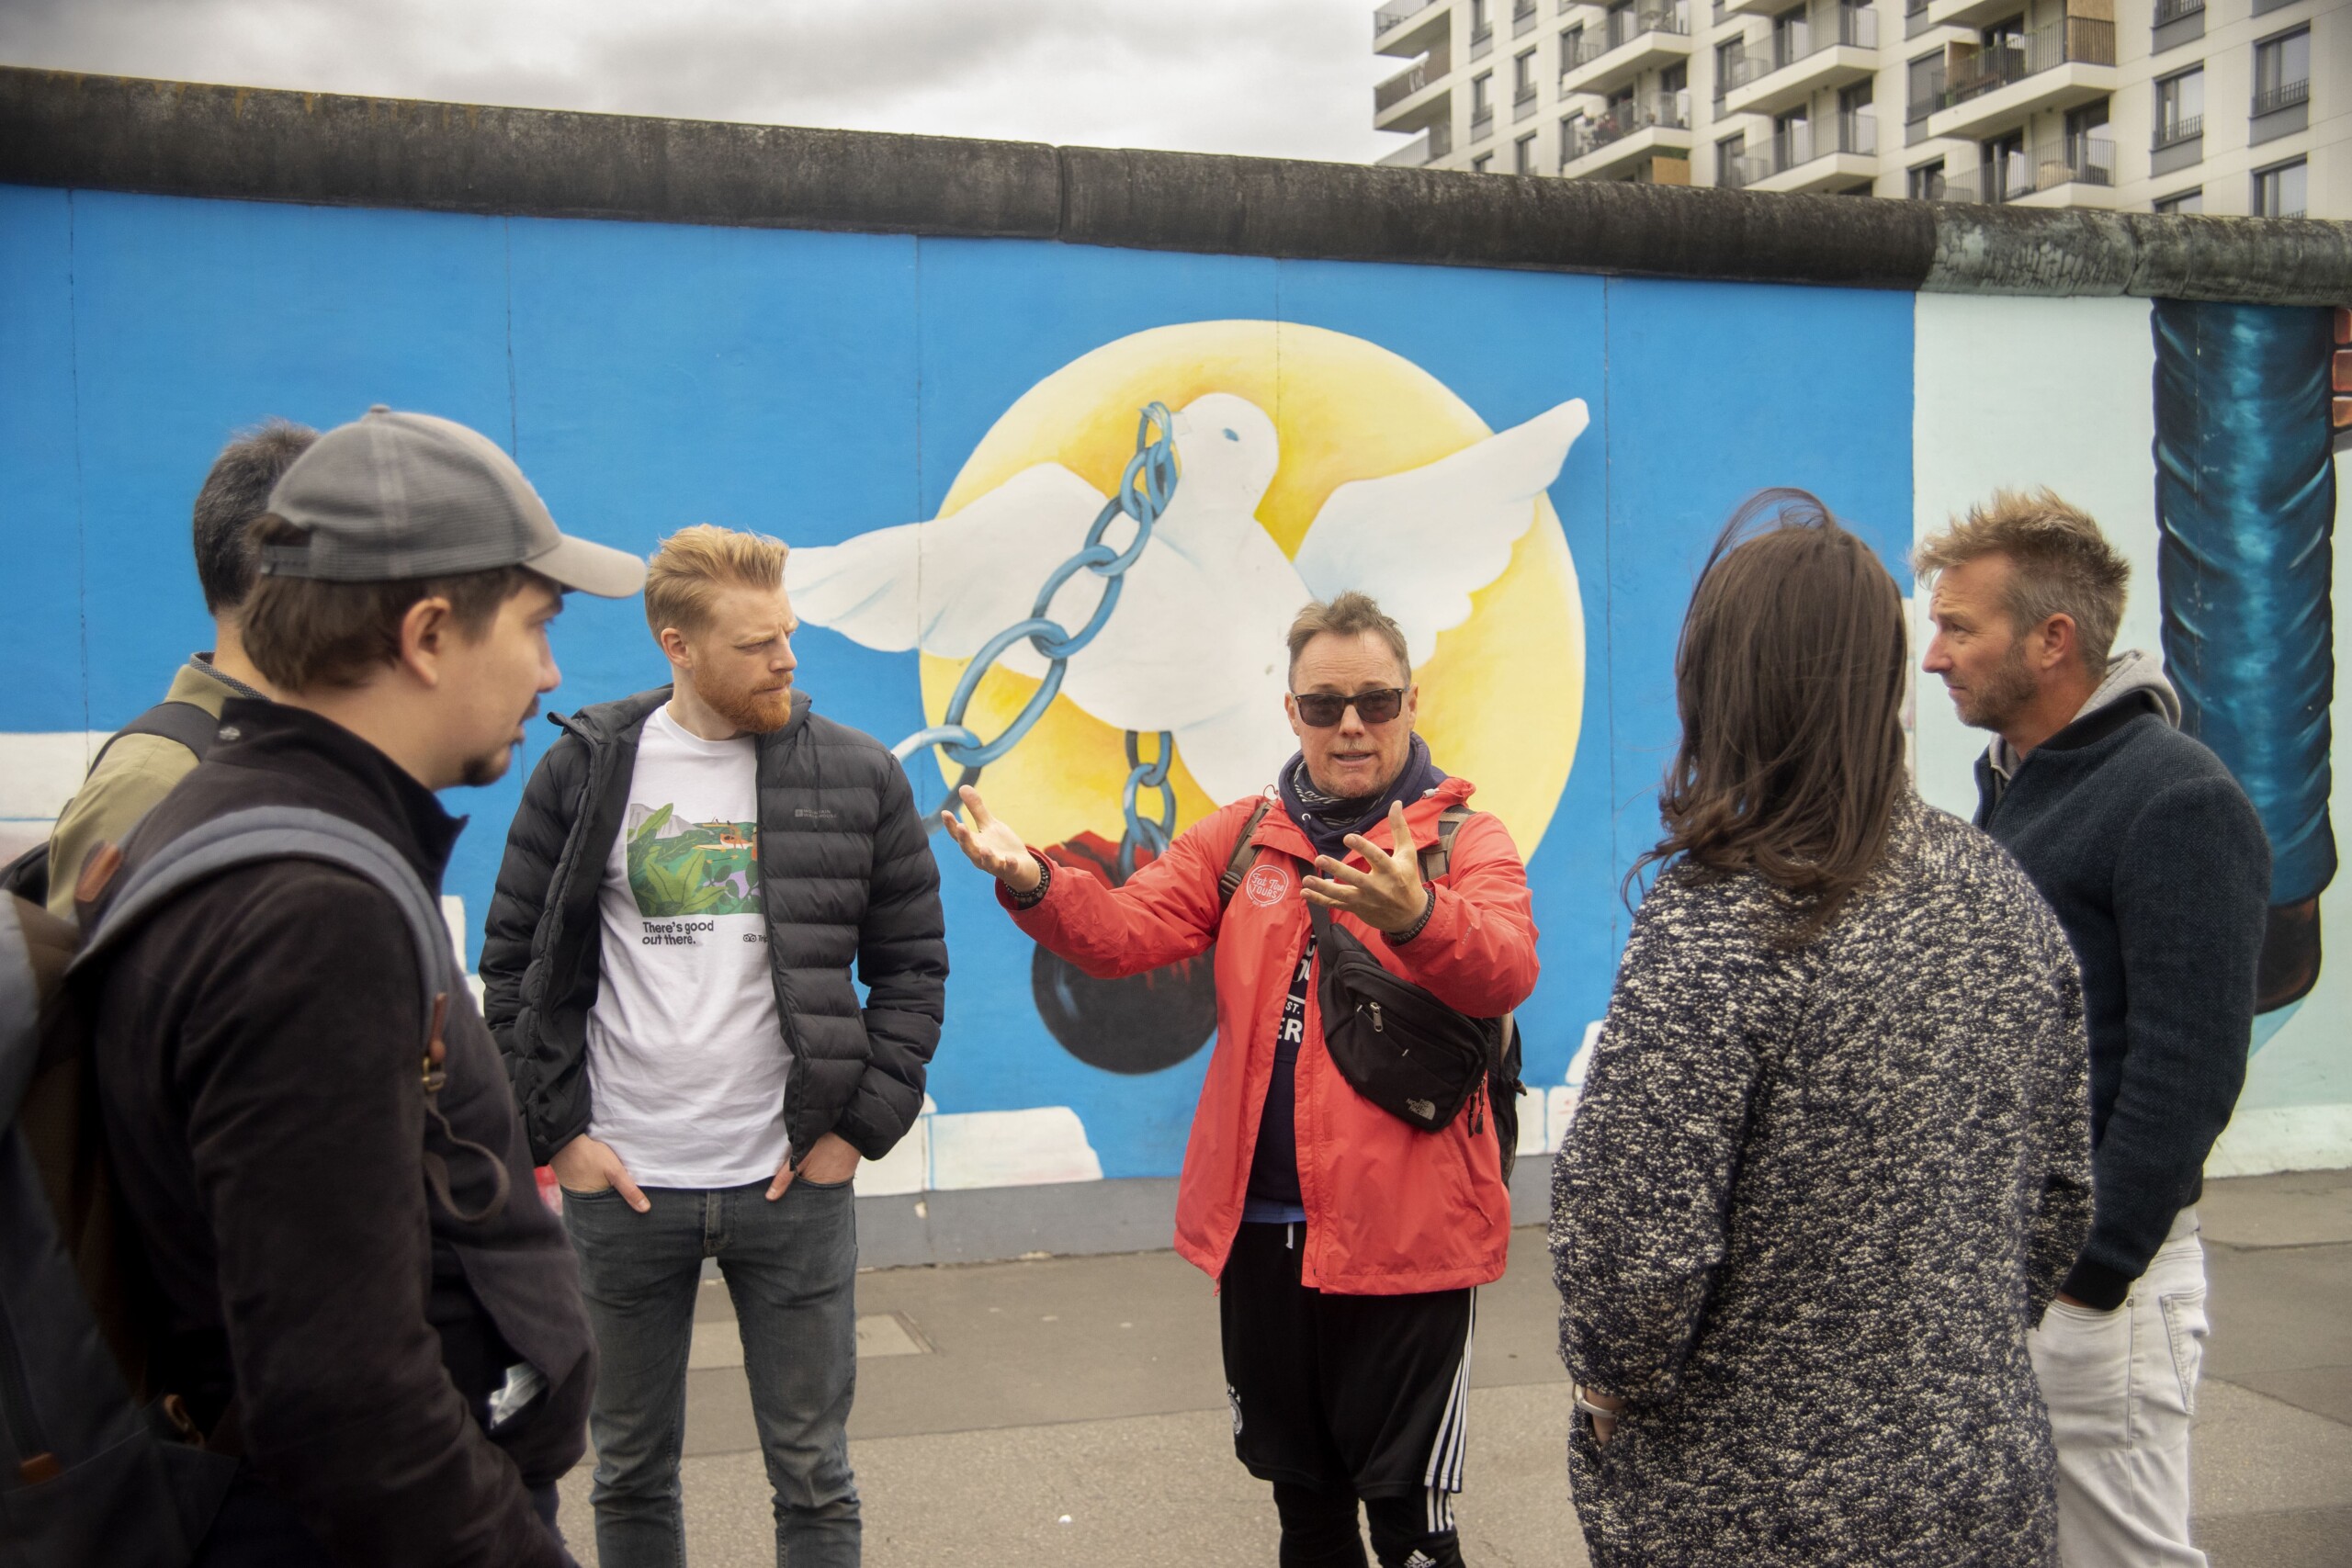 The guides explains the significance of the East Side Gallery in Berlin, Germany